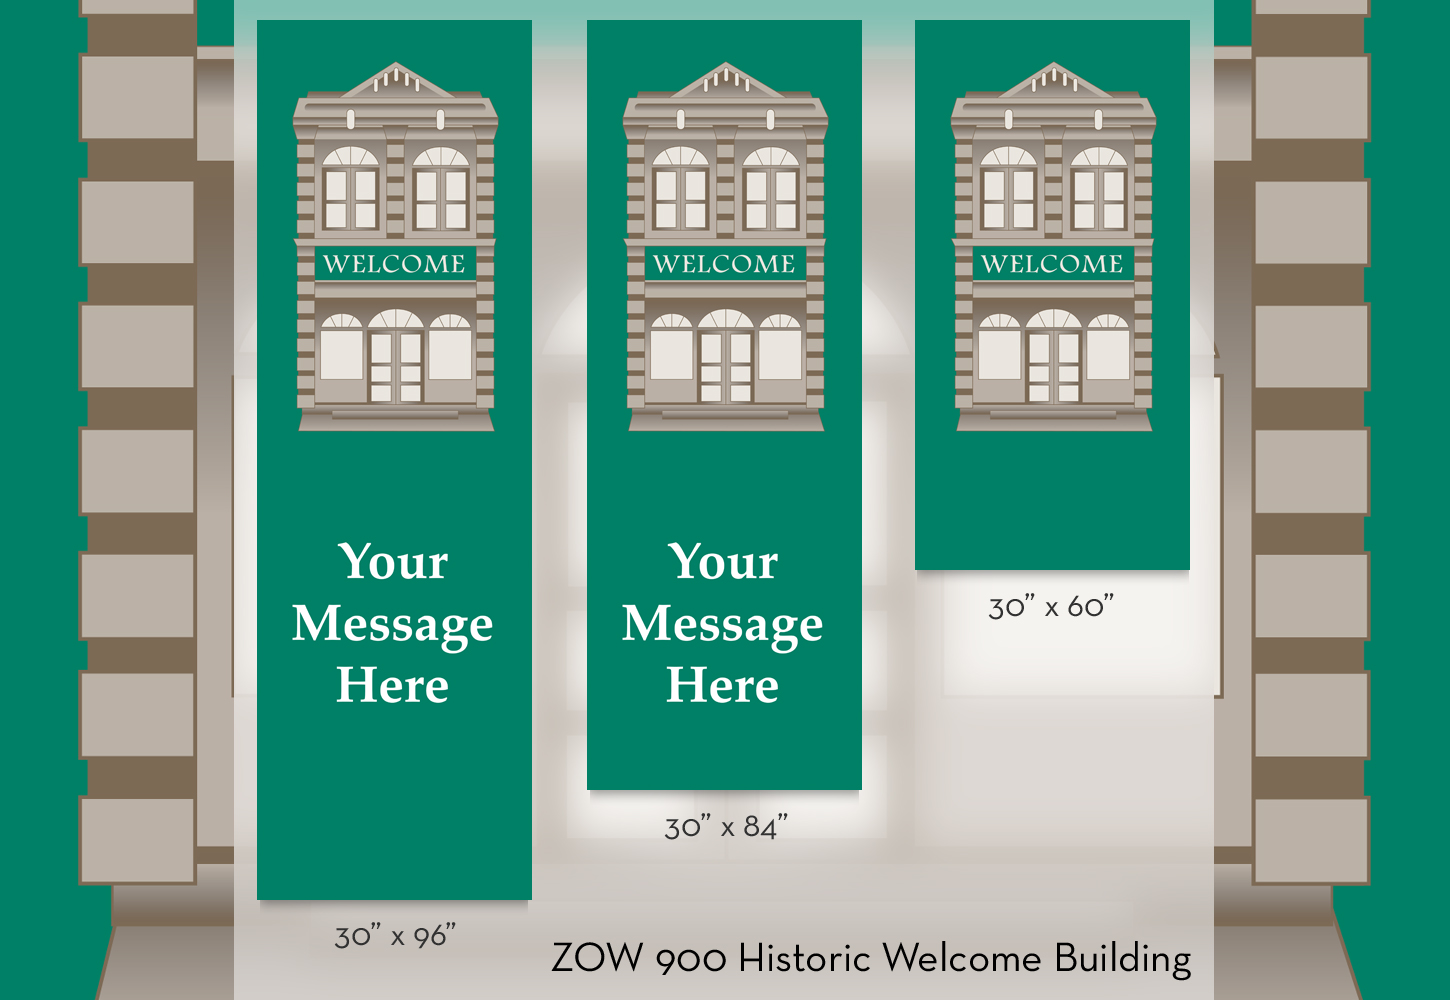 ZOW 900 Historic Welcome Building